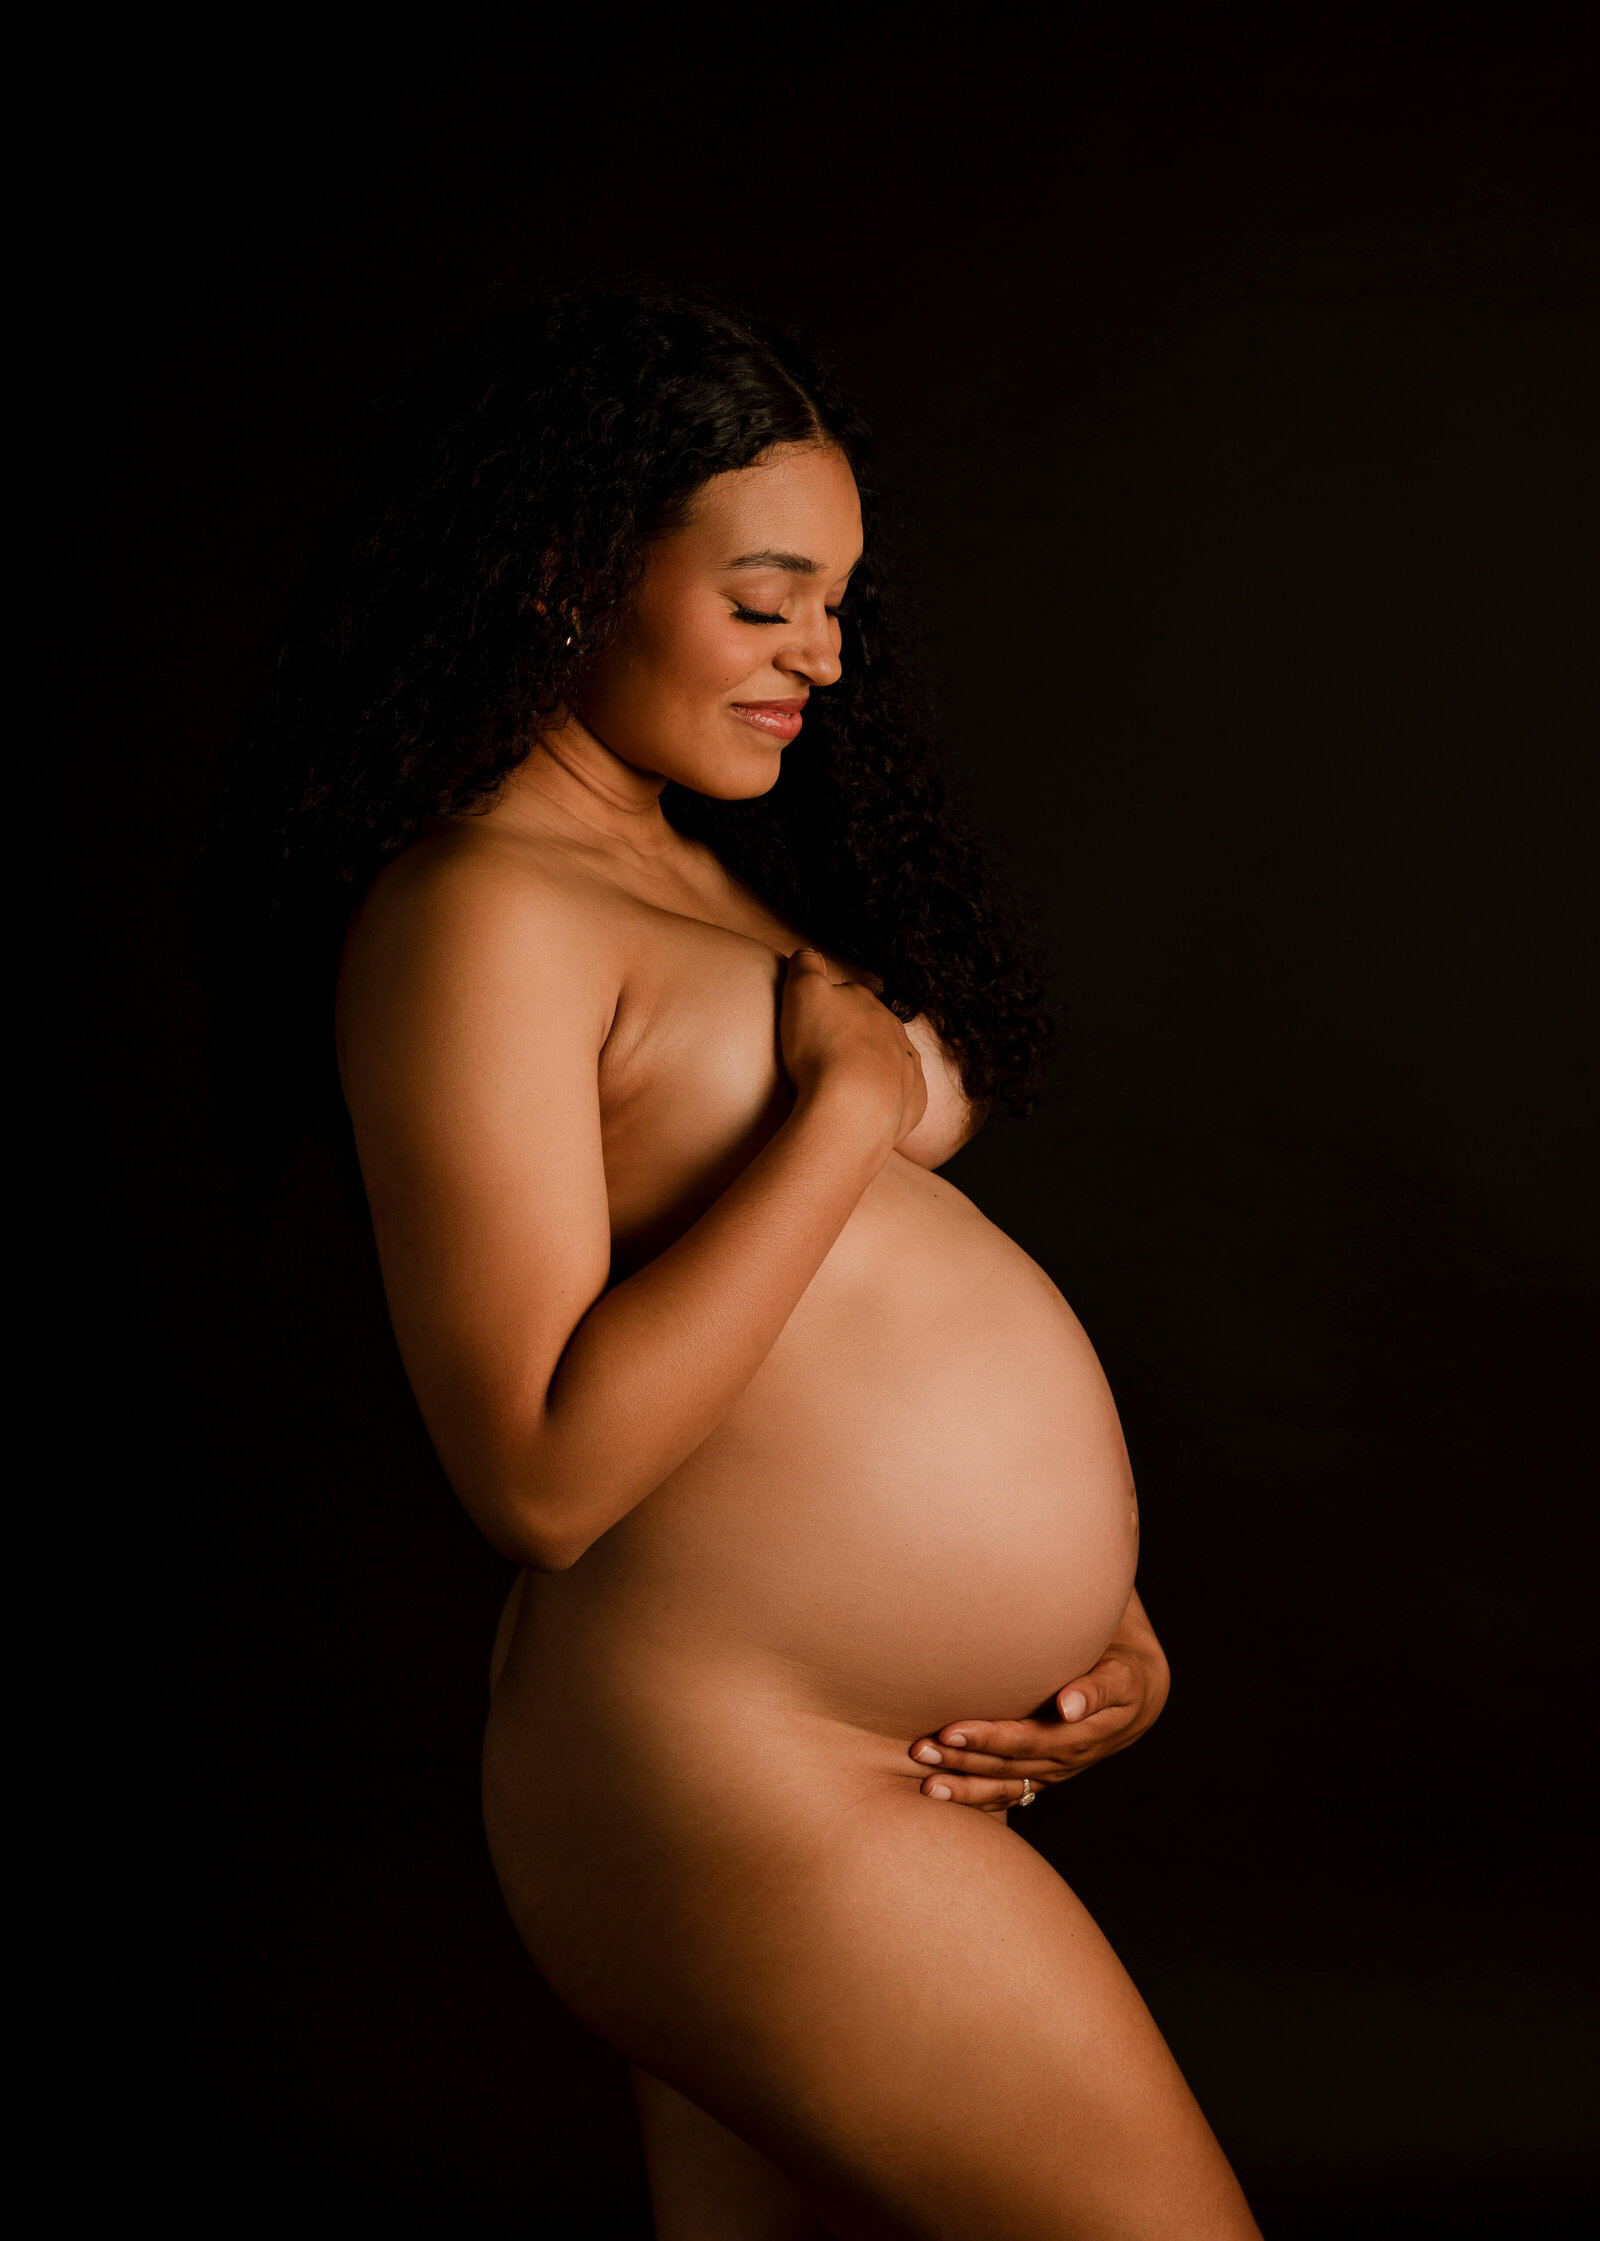 Momma standing nude in studio looking down at belly smiling by Ashley Nicole Photography